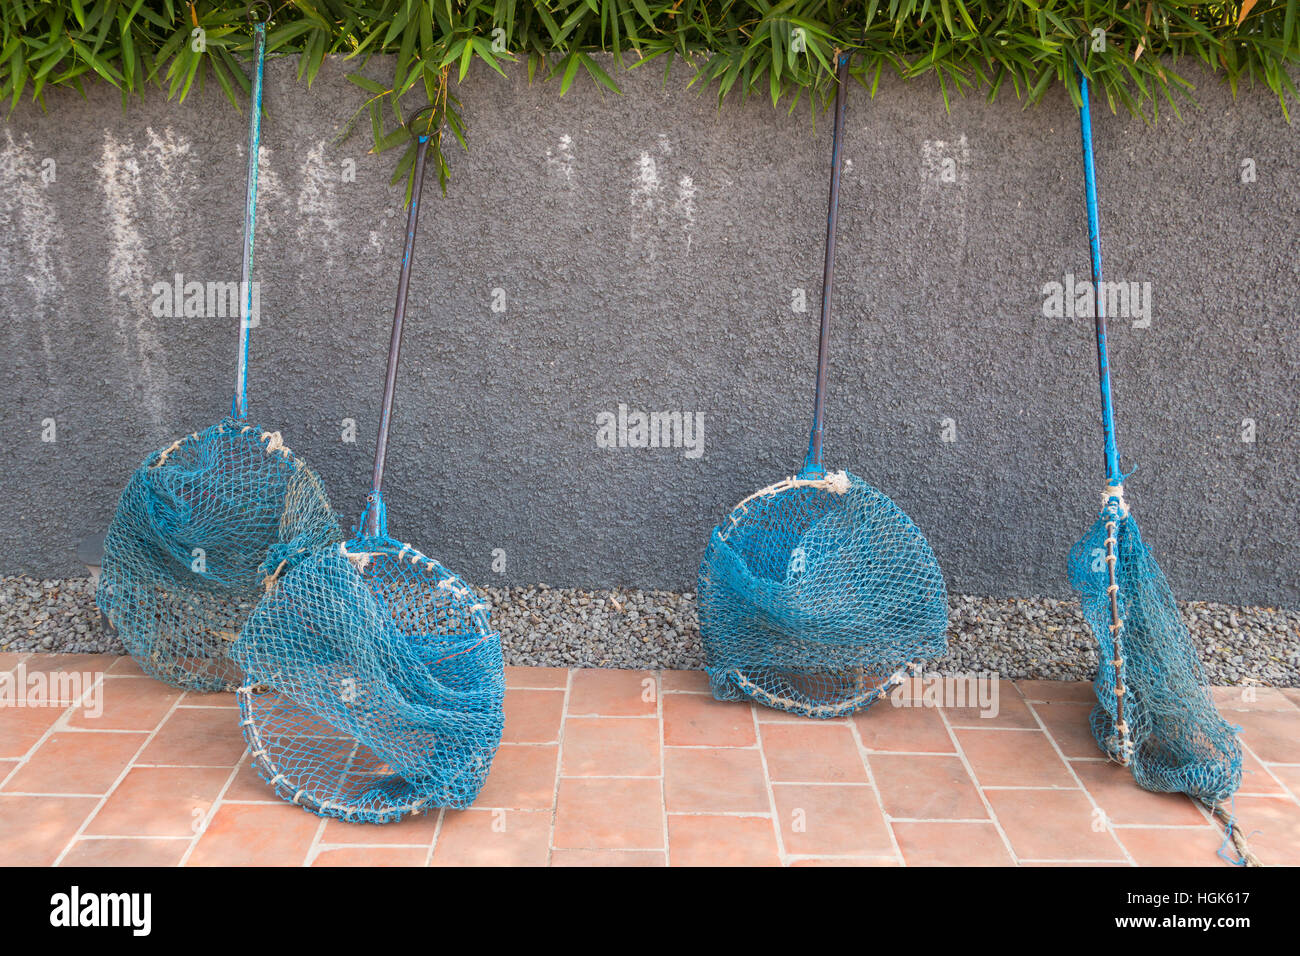 Blue colored stray dog catcher net against a wall Stock Photo